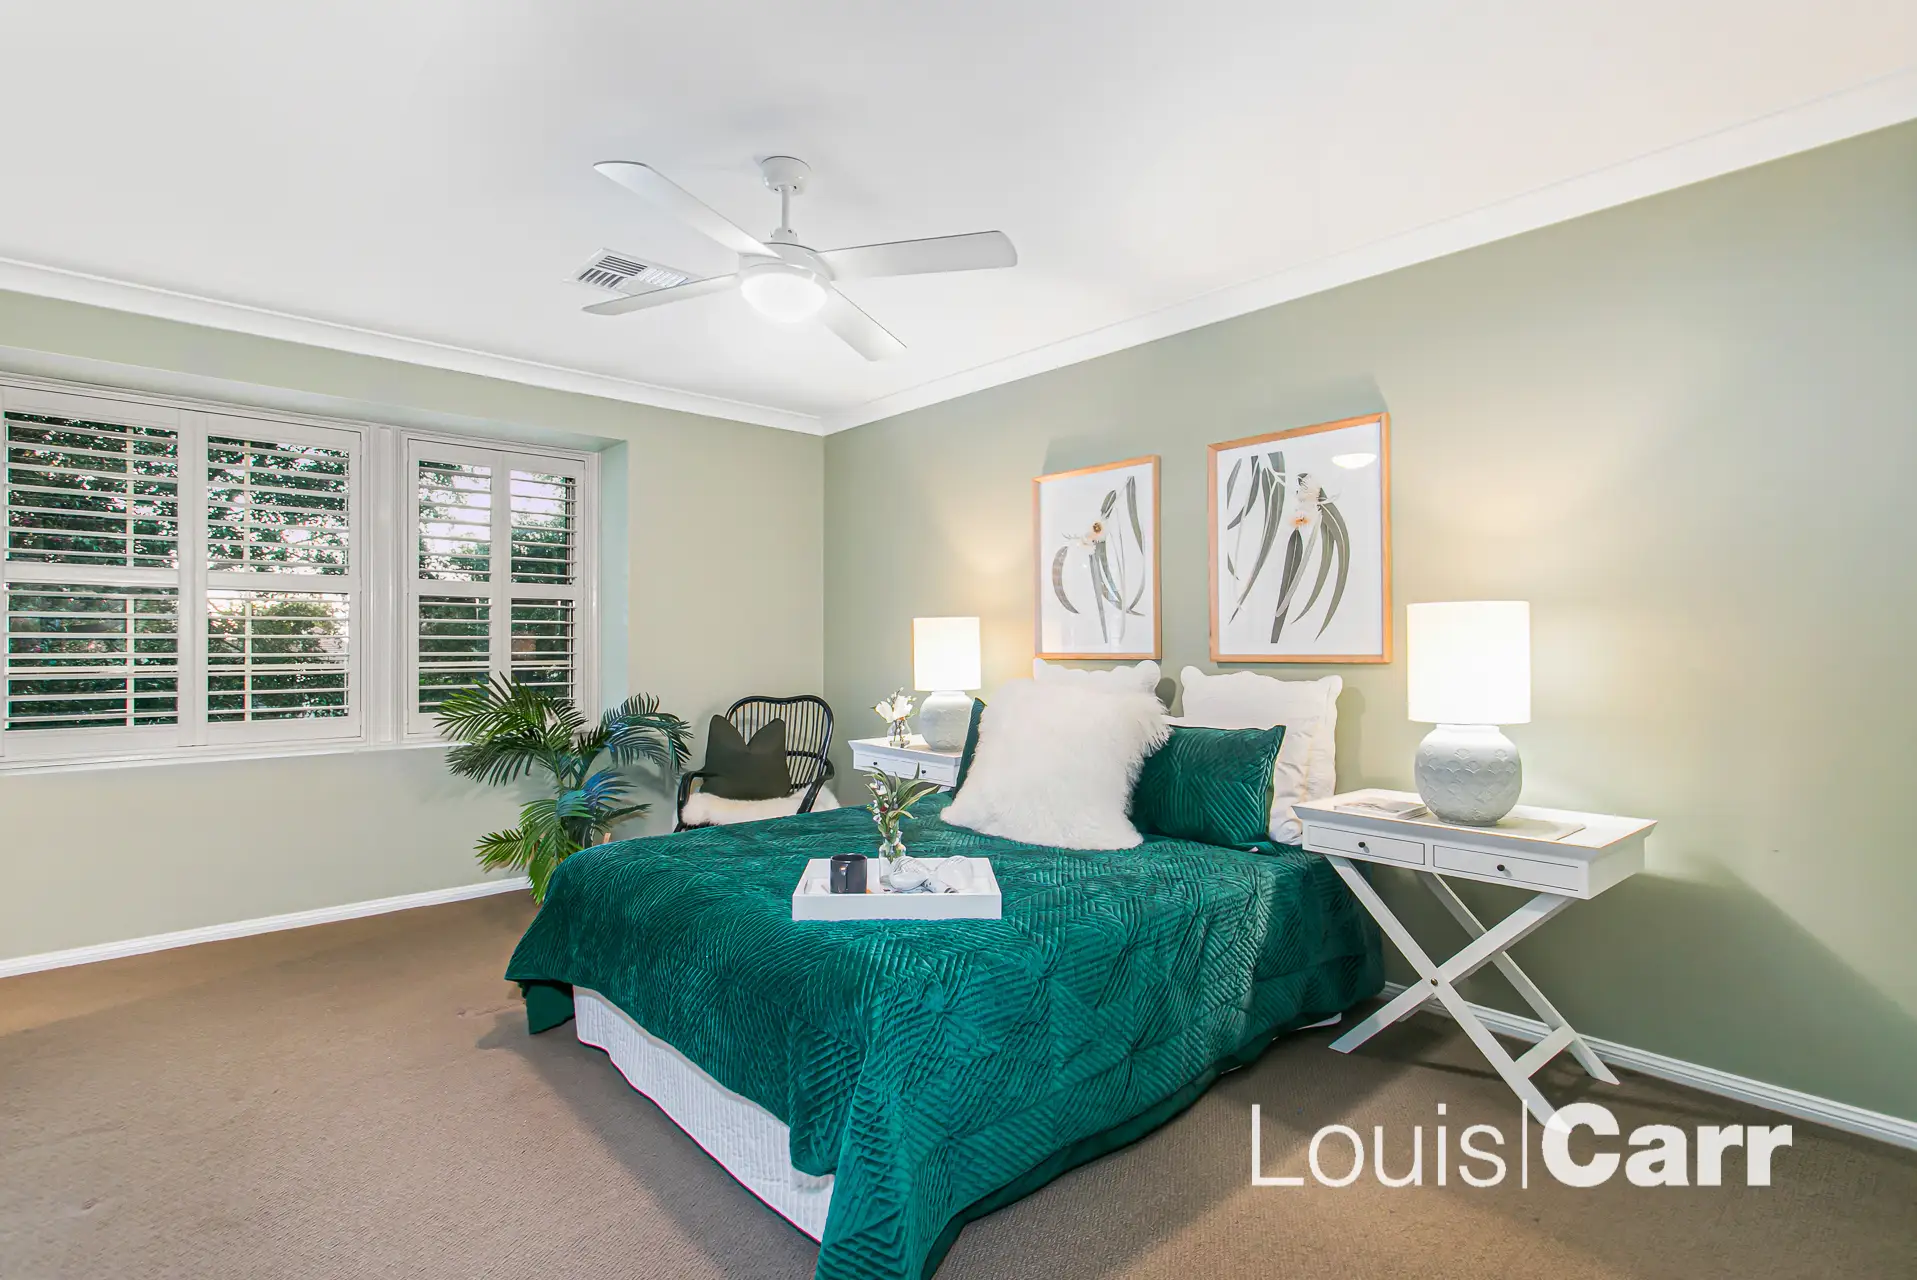 Photo #9: 18 Lyndhurst Court, West Pennant Hills - Sold by Louis Carr Real Estate